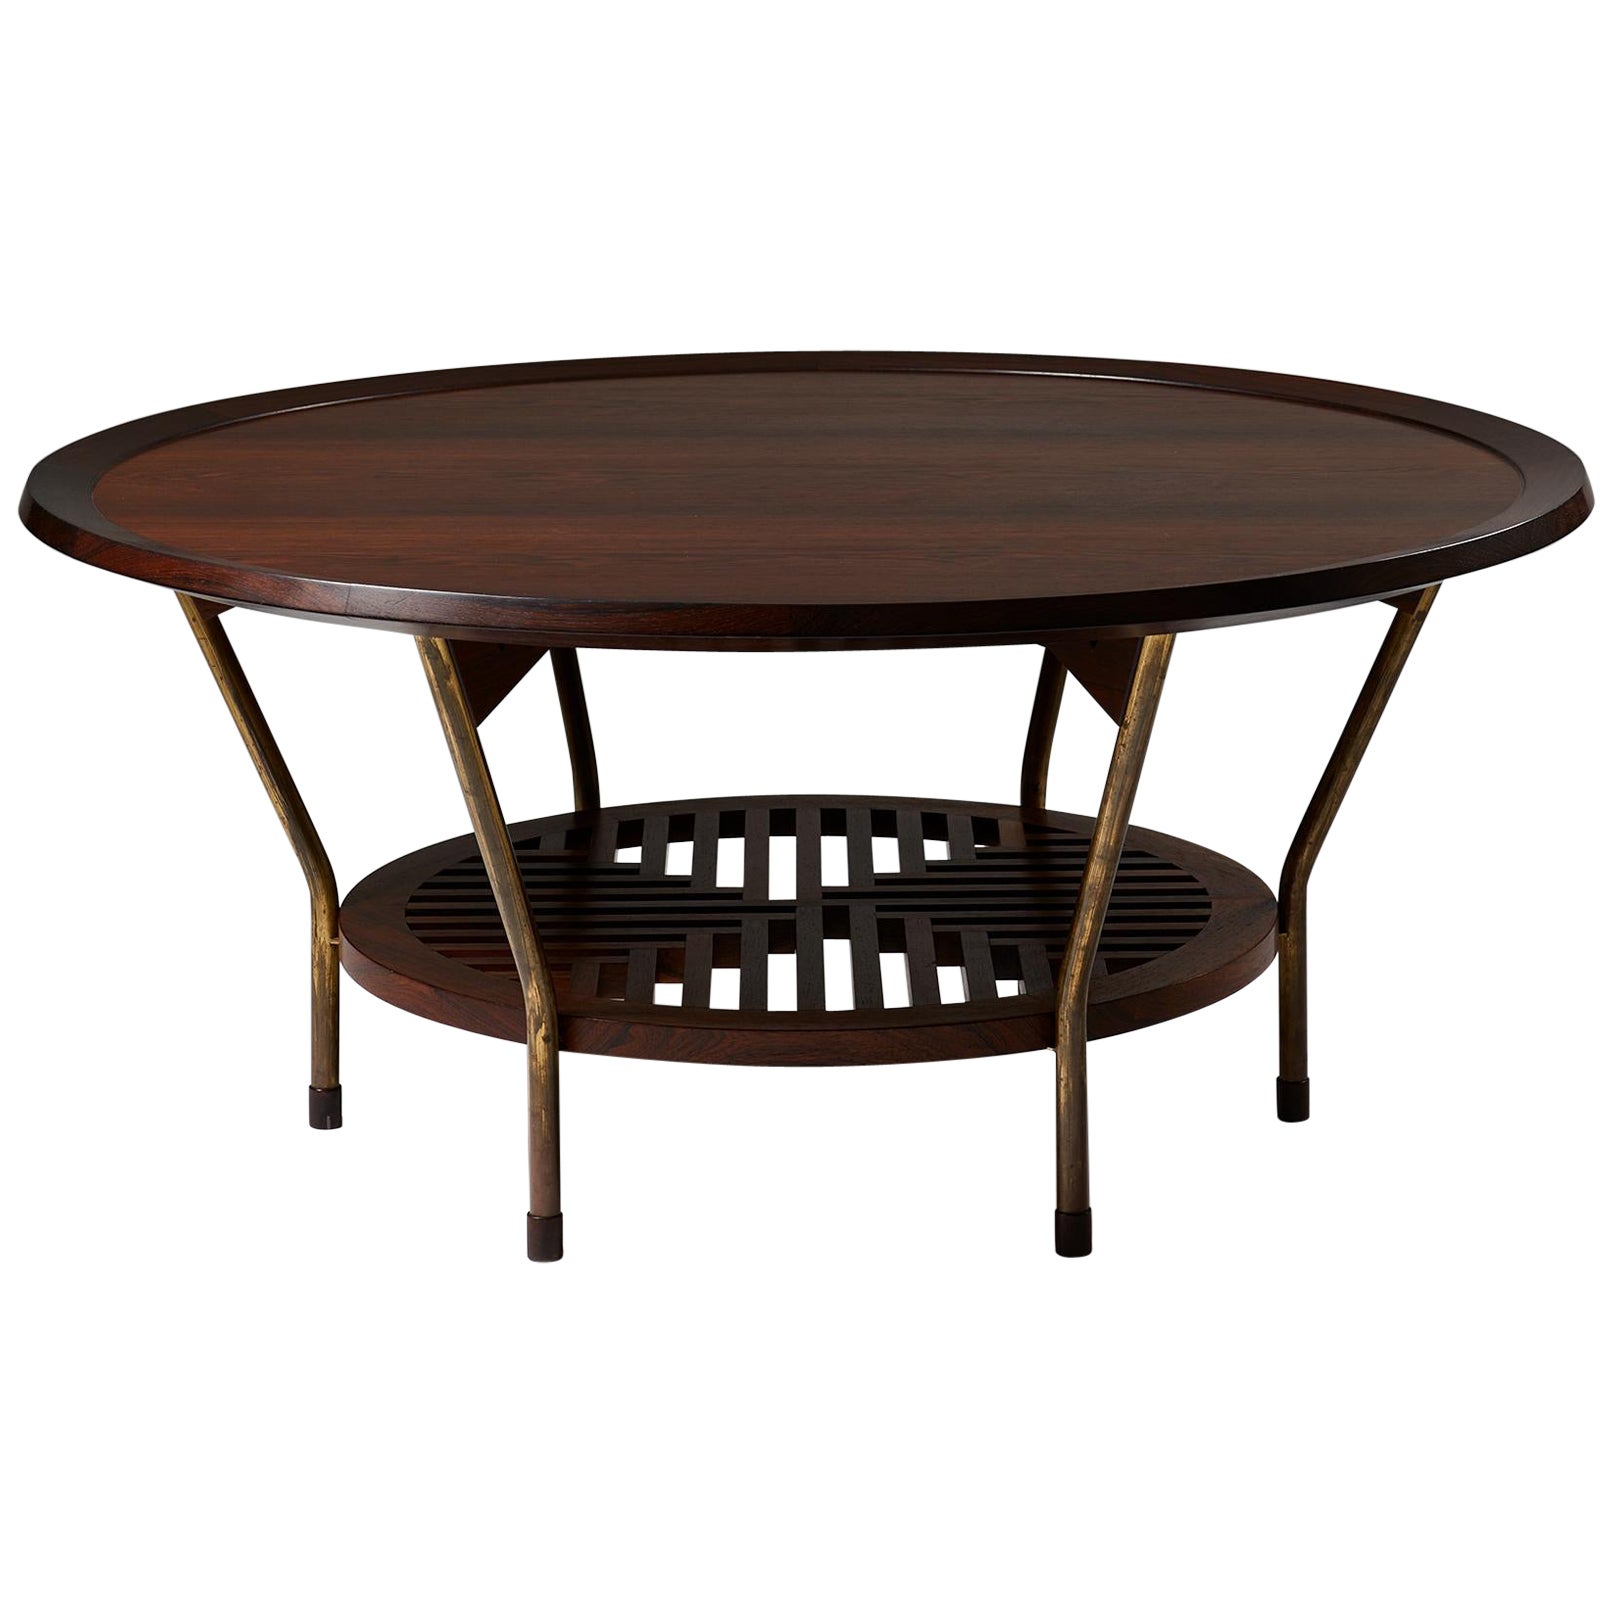 Occasional Table Designed by Frits Schlegel, Rosewood and Brass, Denmark, 1949